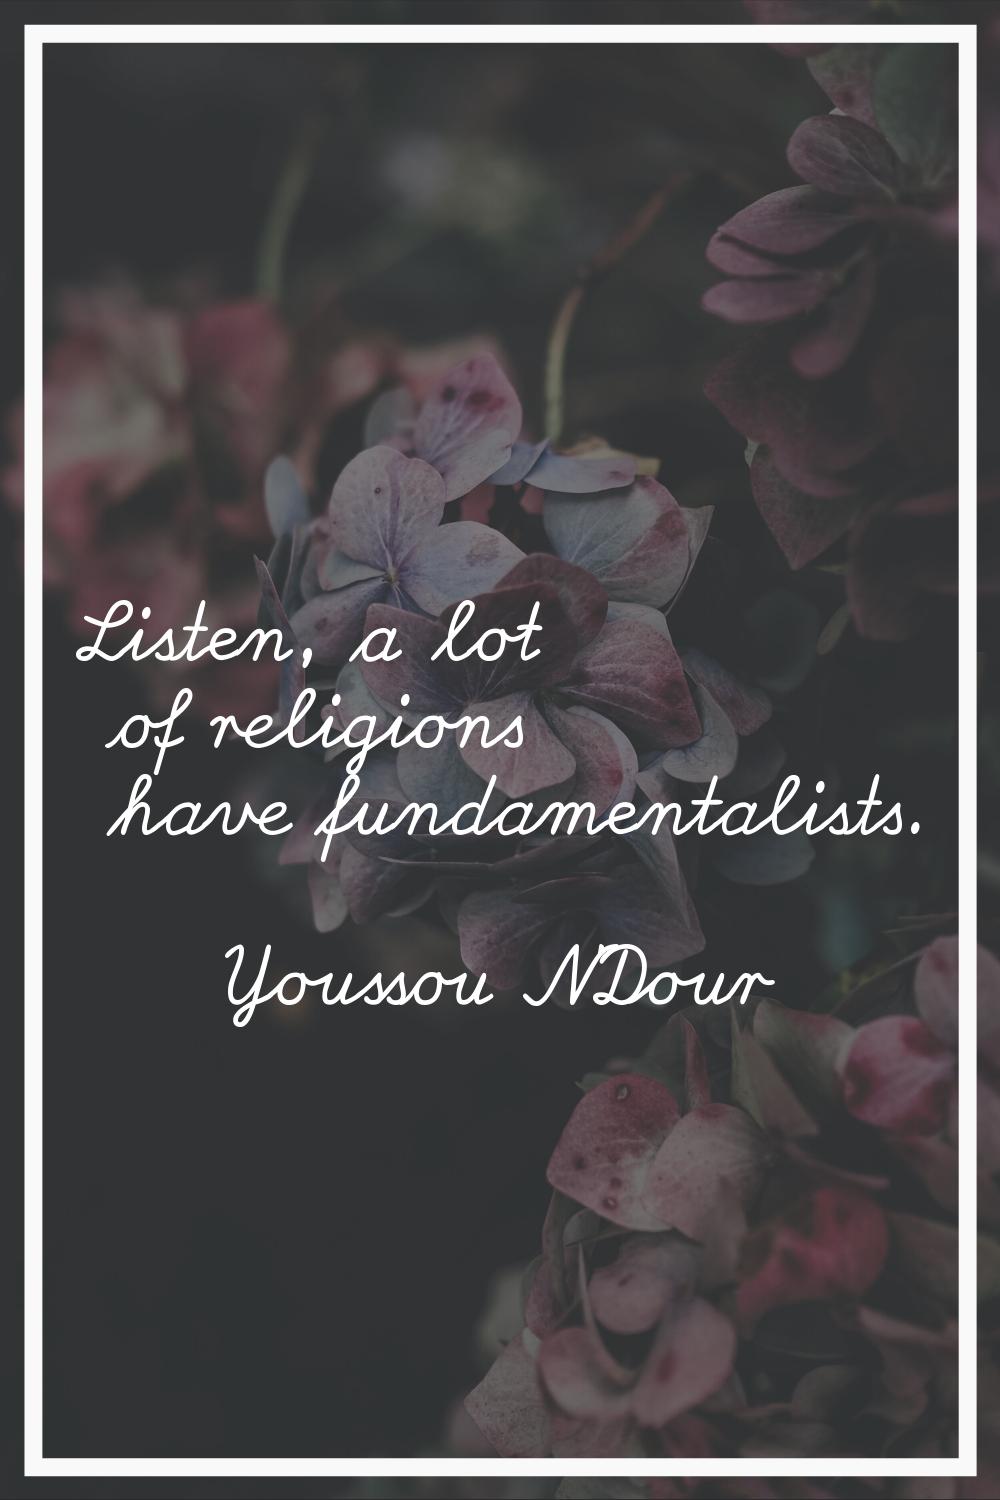 Listen, a lot of religions have fundamentalists.